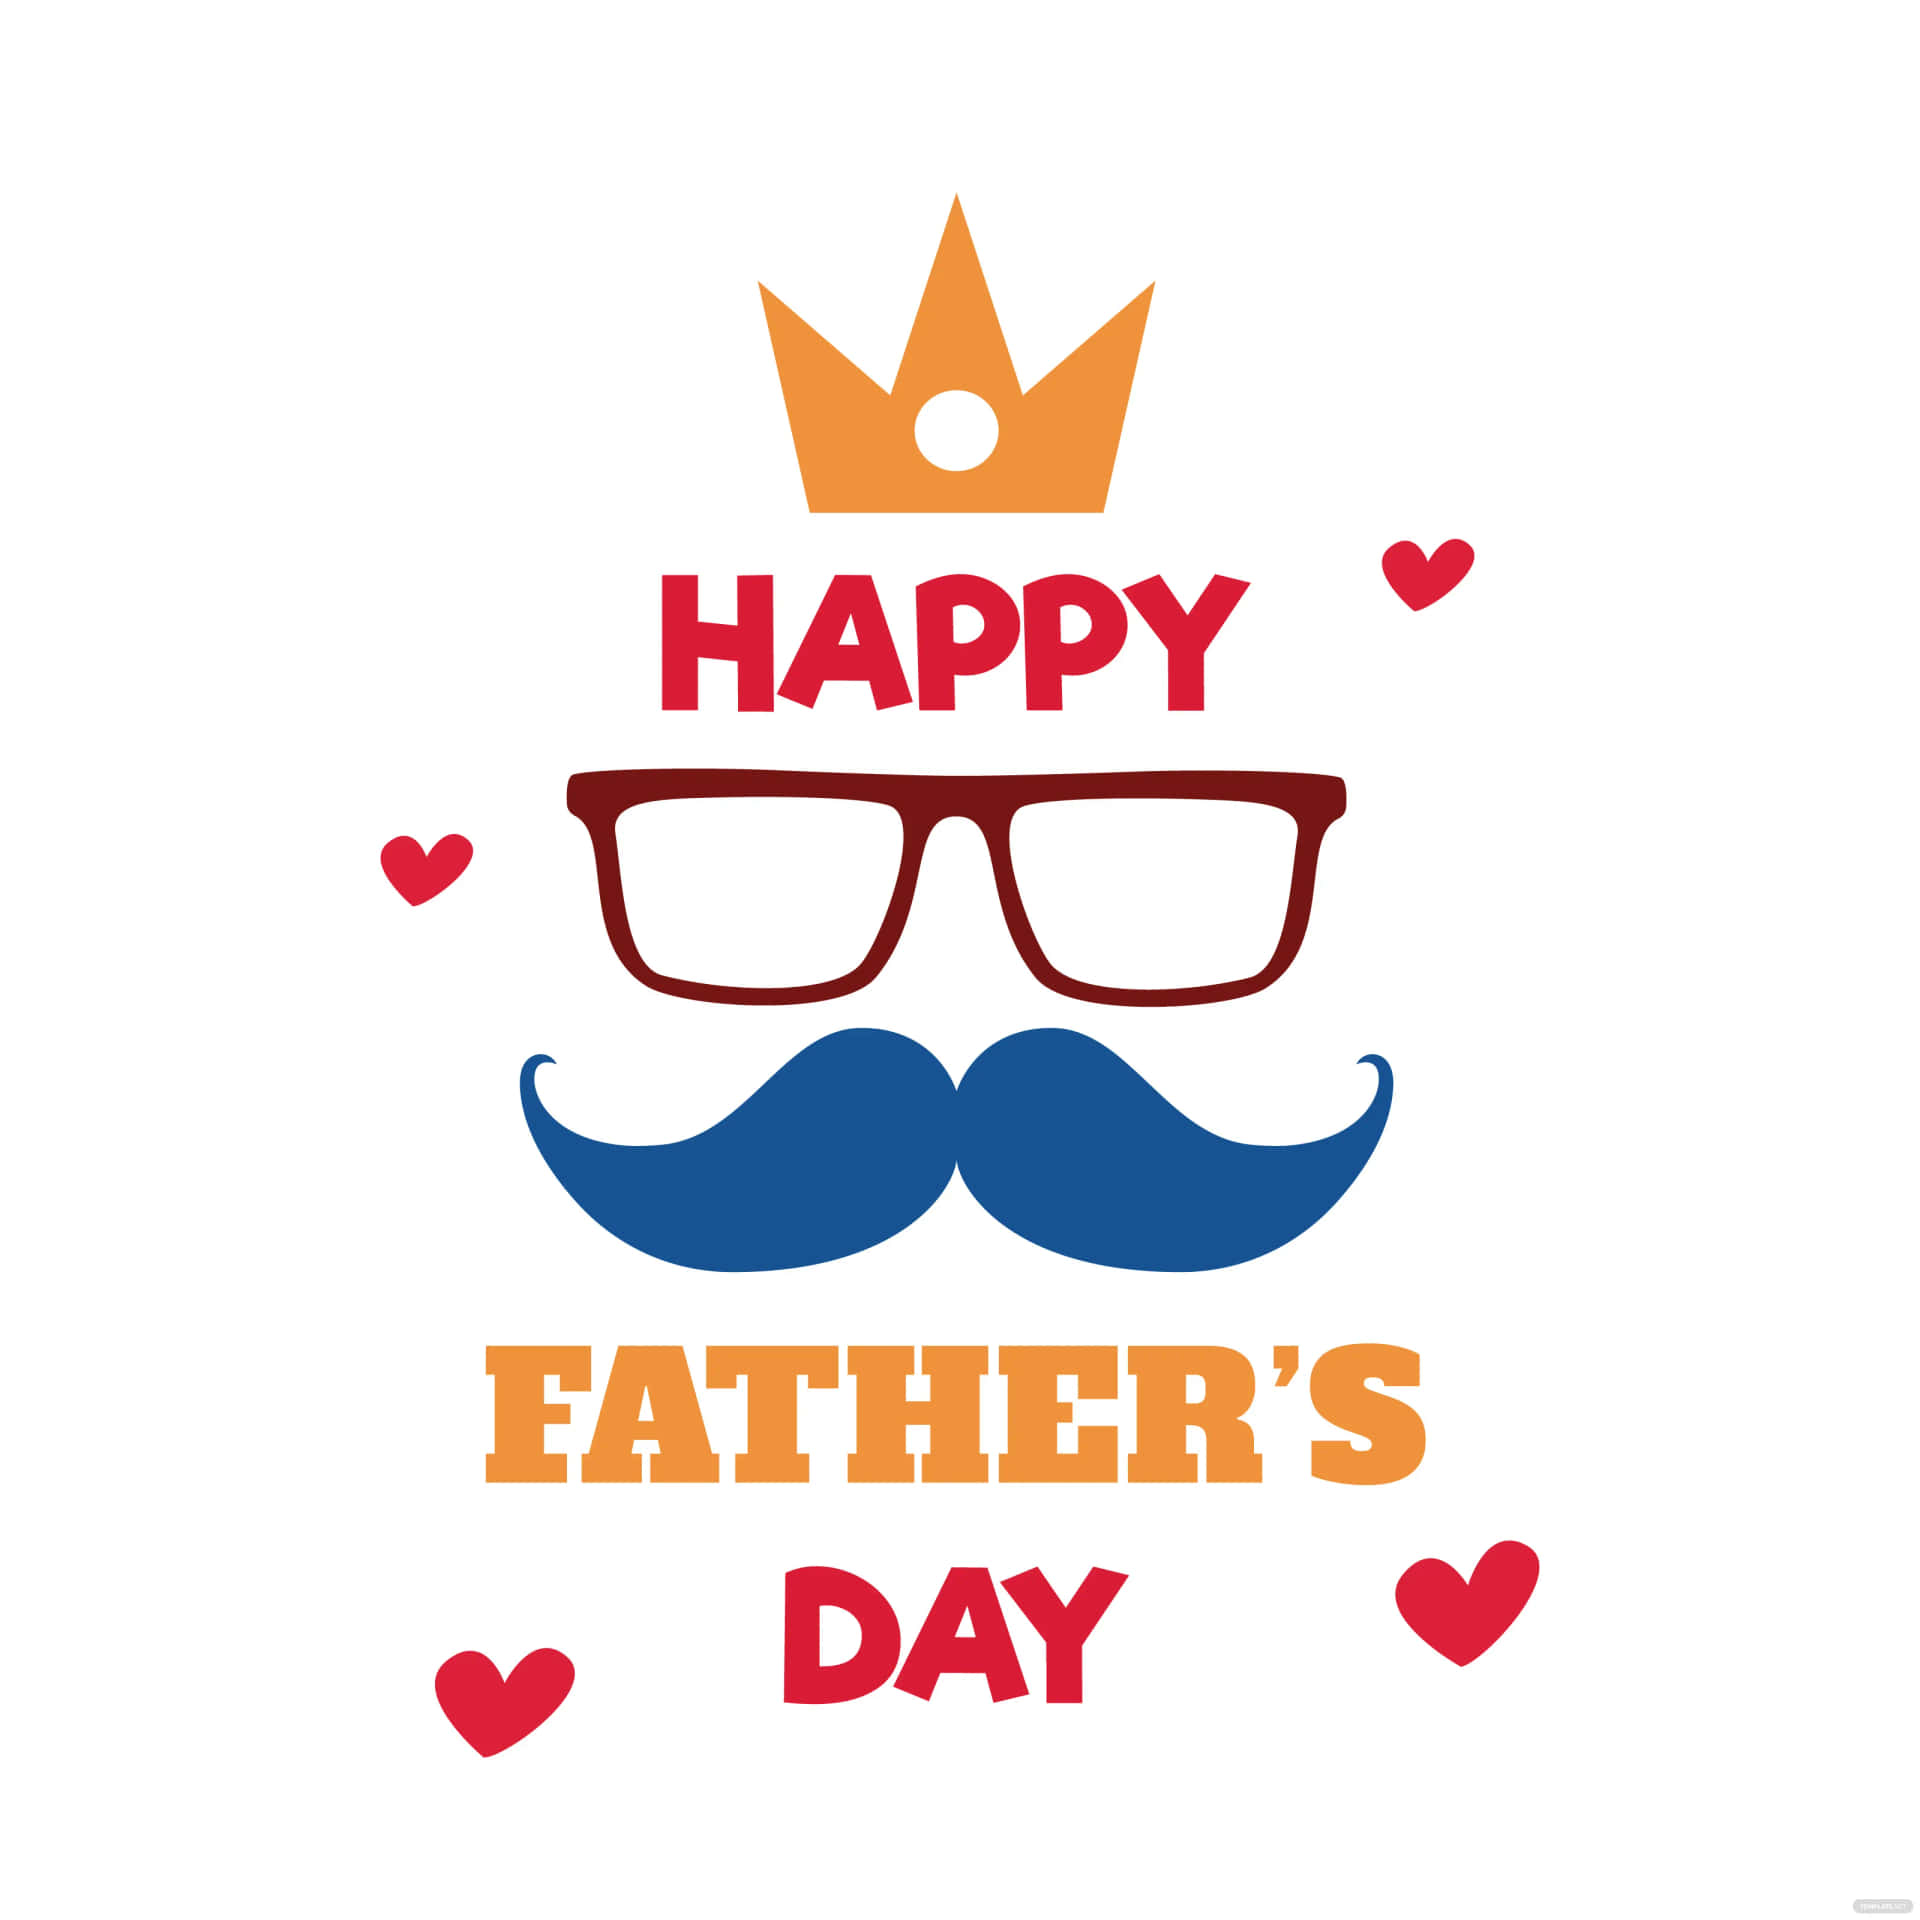 Let's celebrate the strength and courage of fatherhood this Father's Day